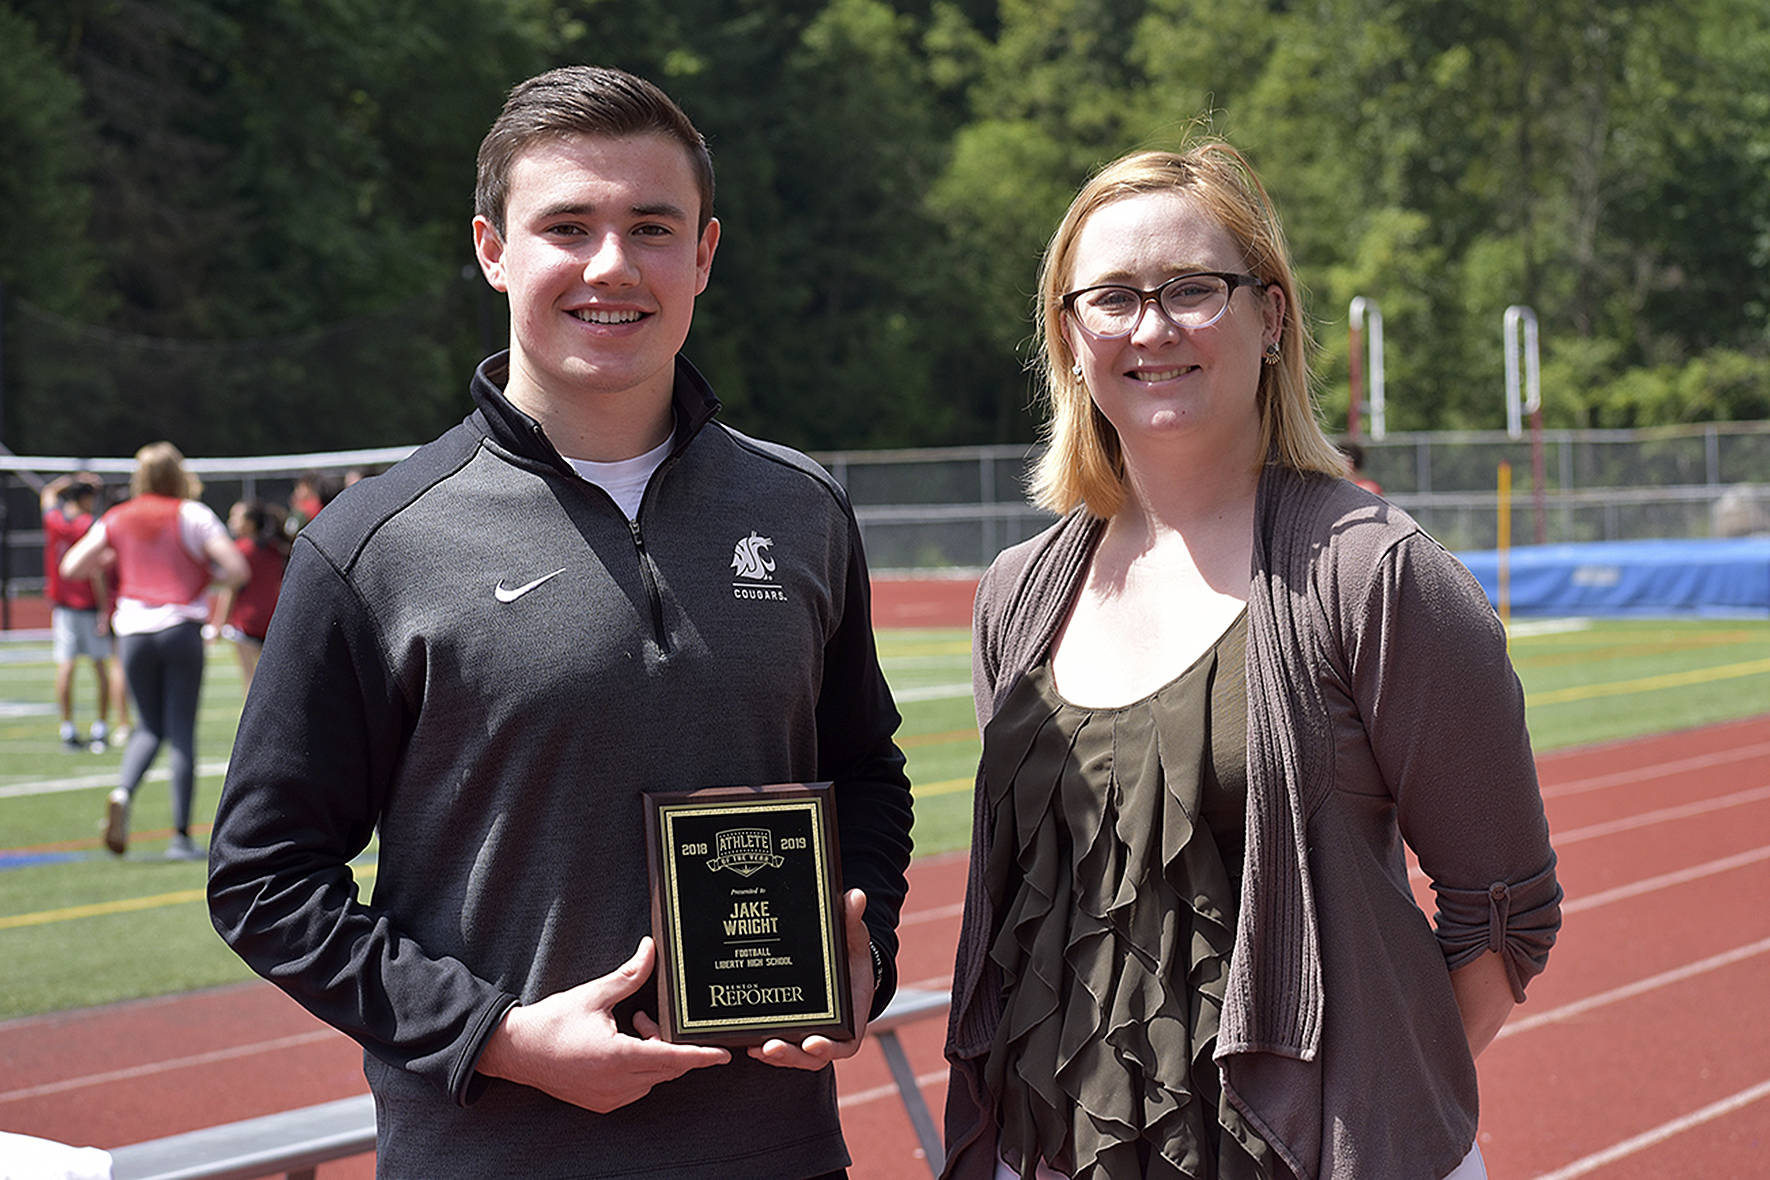 The first ever Male Athlete of the Year for the Renton Reporter went to Jake Wright, left. He was awarded a plaque by Renton Reporter editor Danielle Chastaine (right).                                Photo by Haley Ausbun